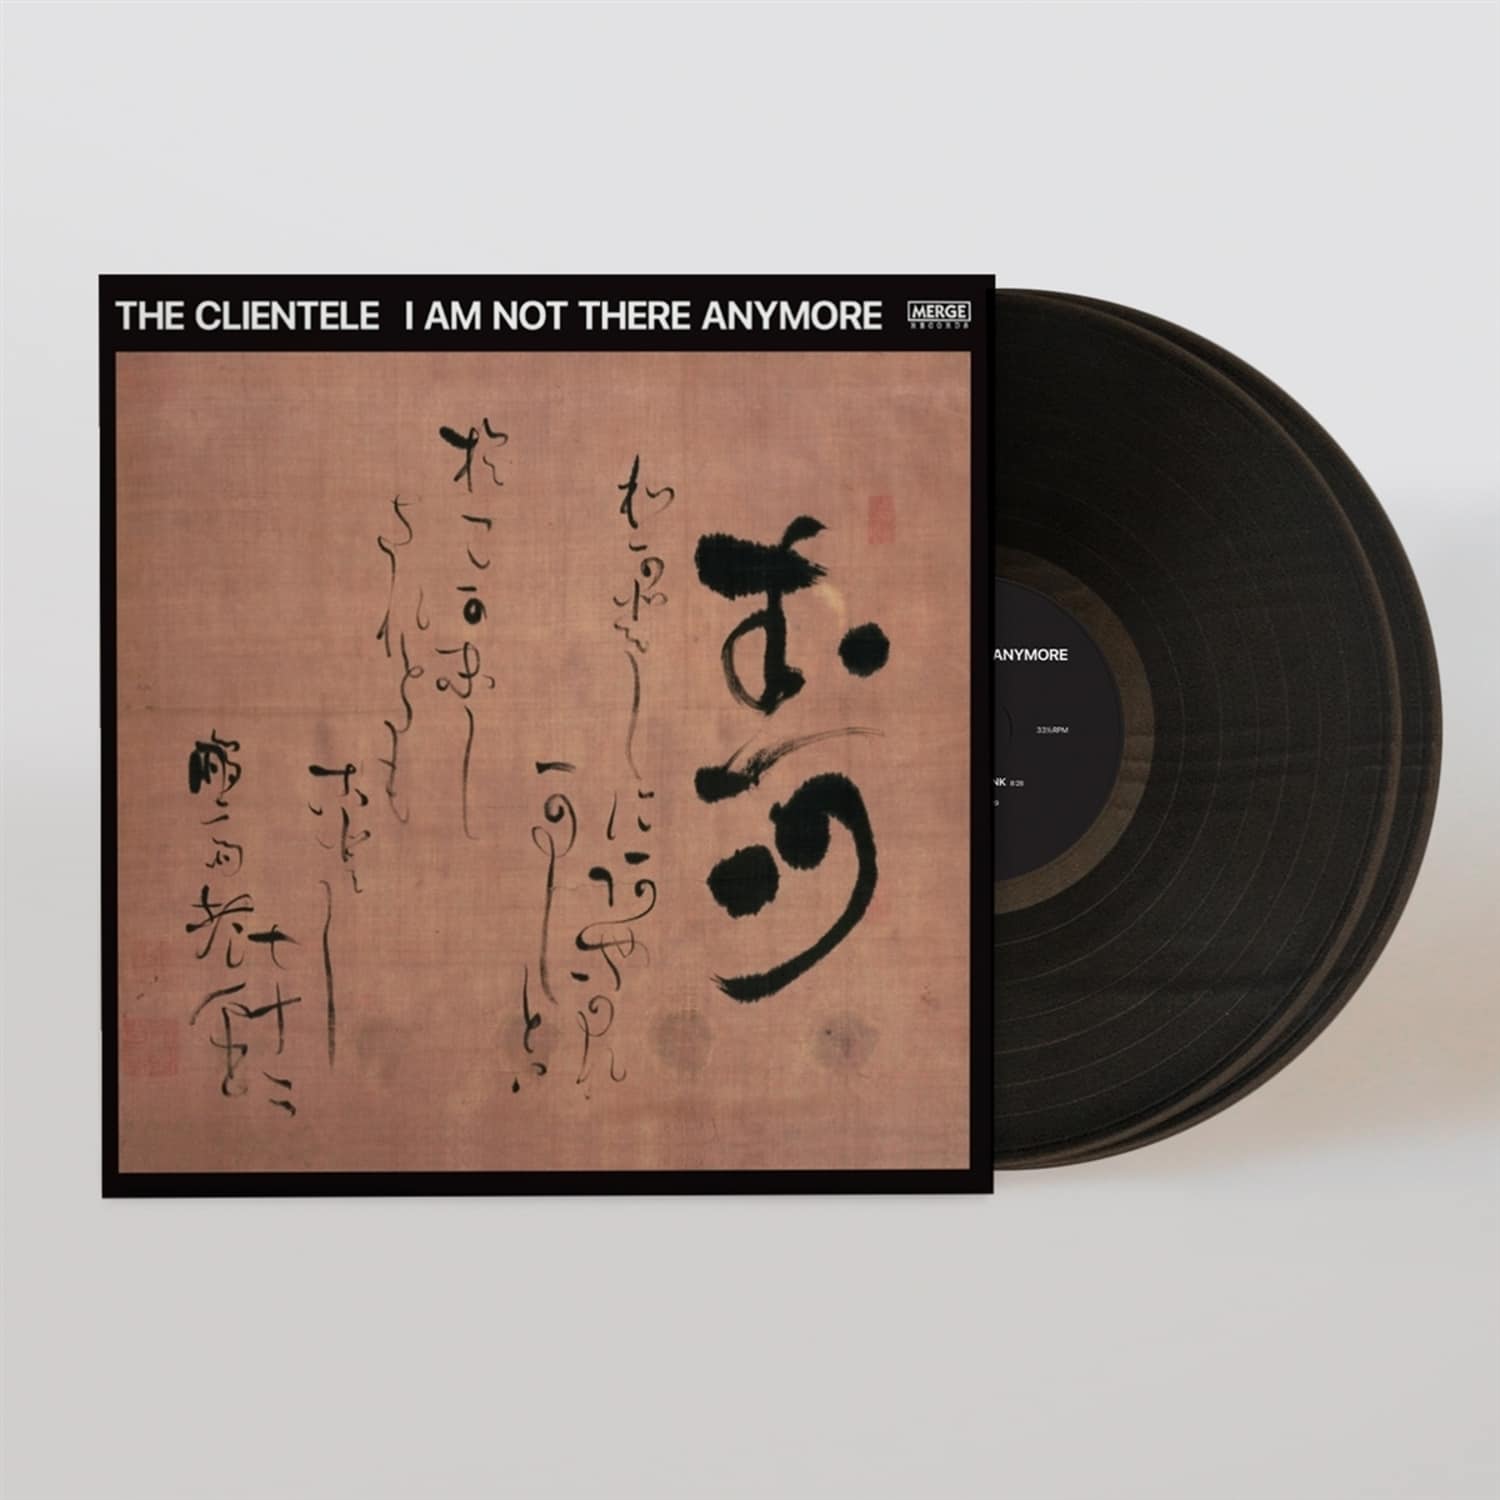  The Clientele - I AM NOT THERE ANYMORE 